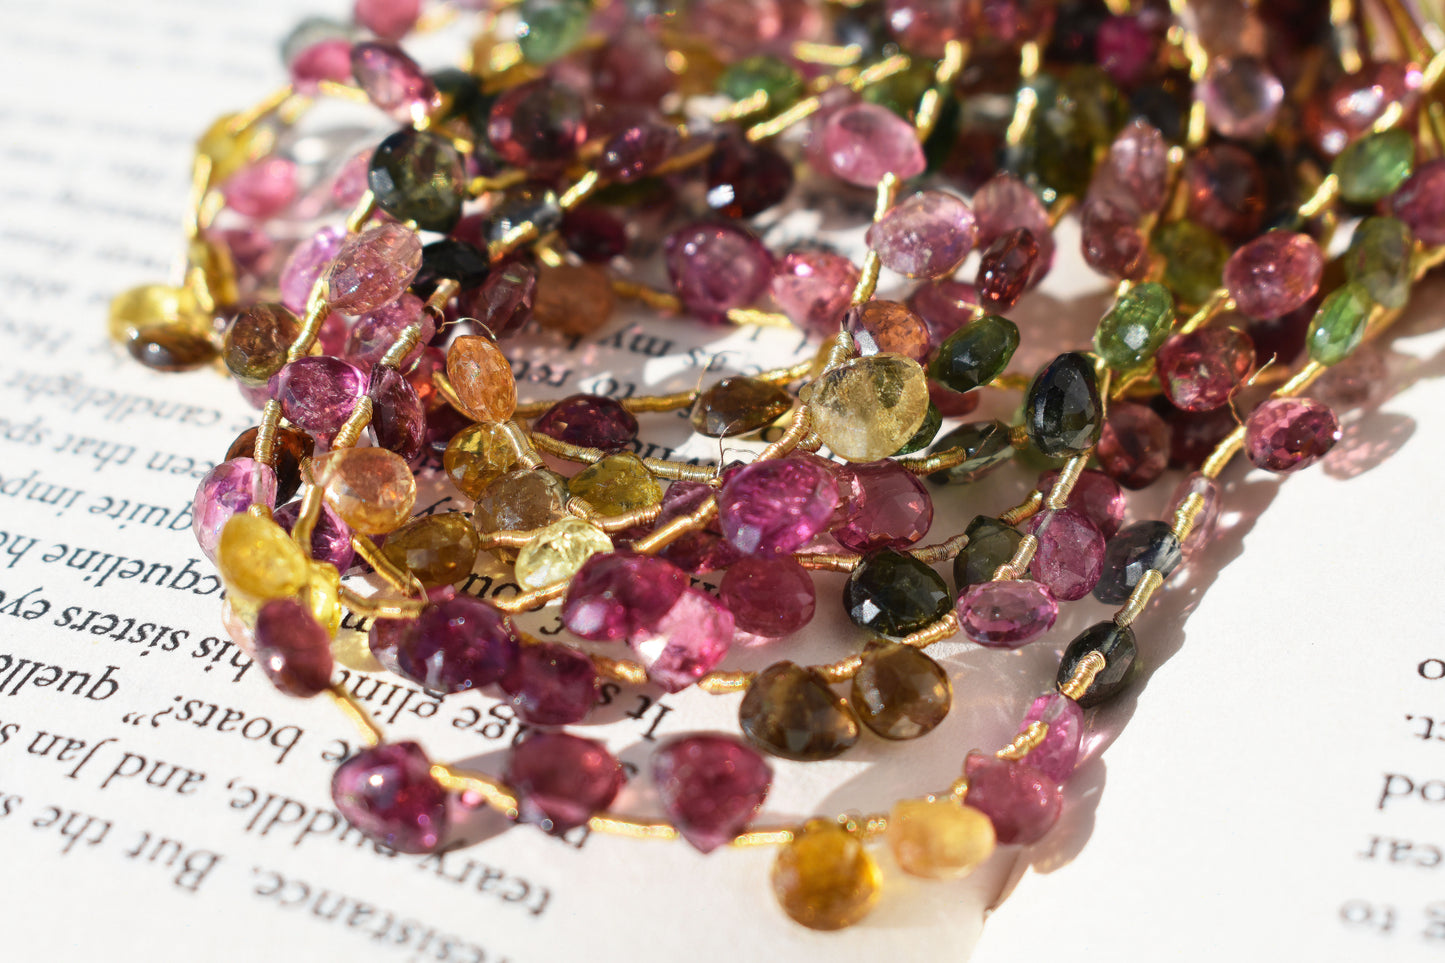 Tourmaline Faceted Pear Beads - Multi-Color Family 5-8mm